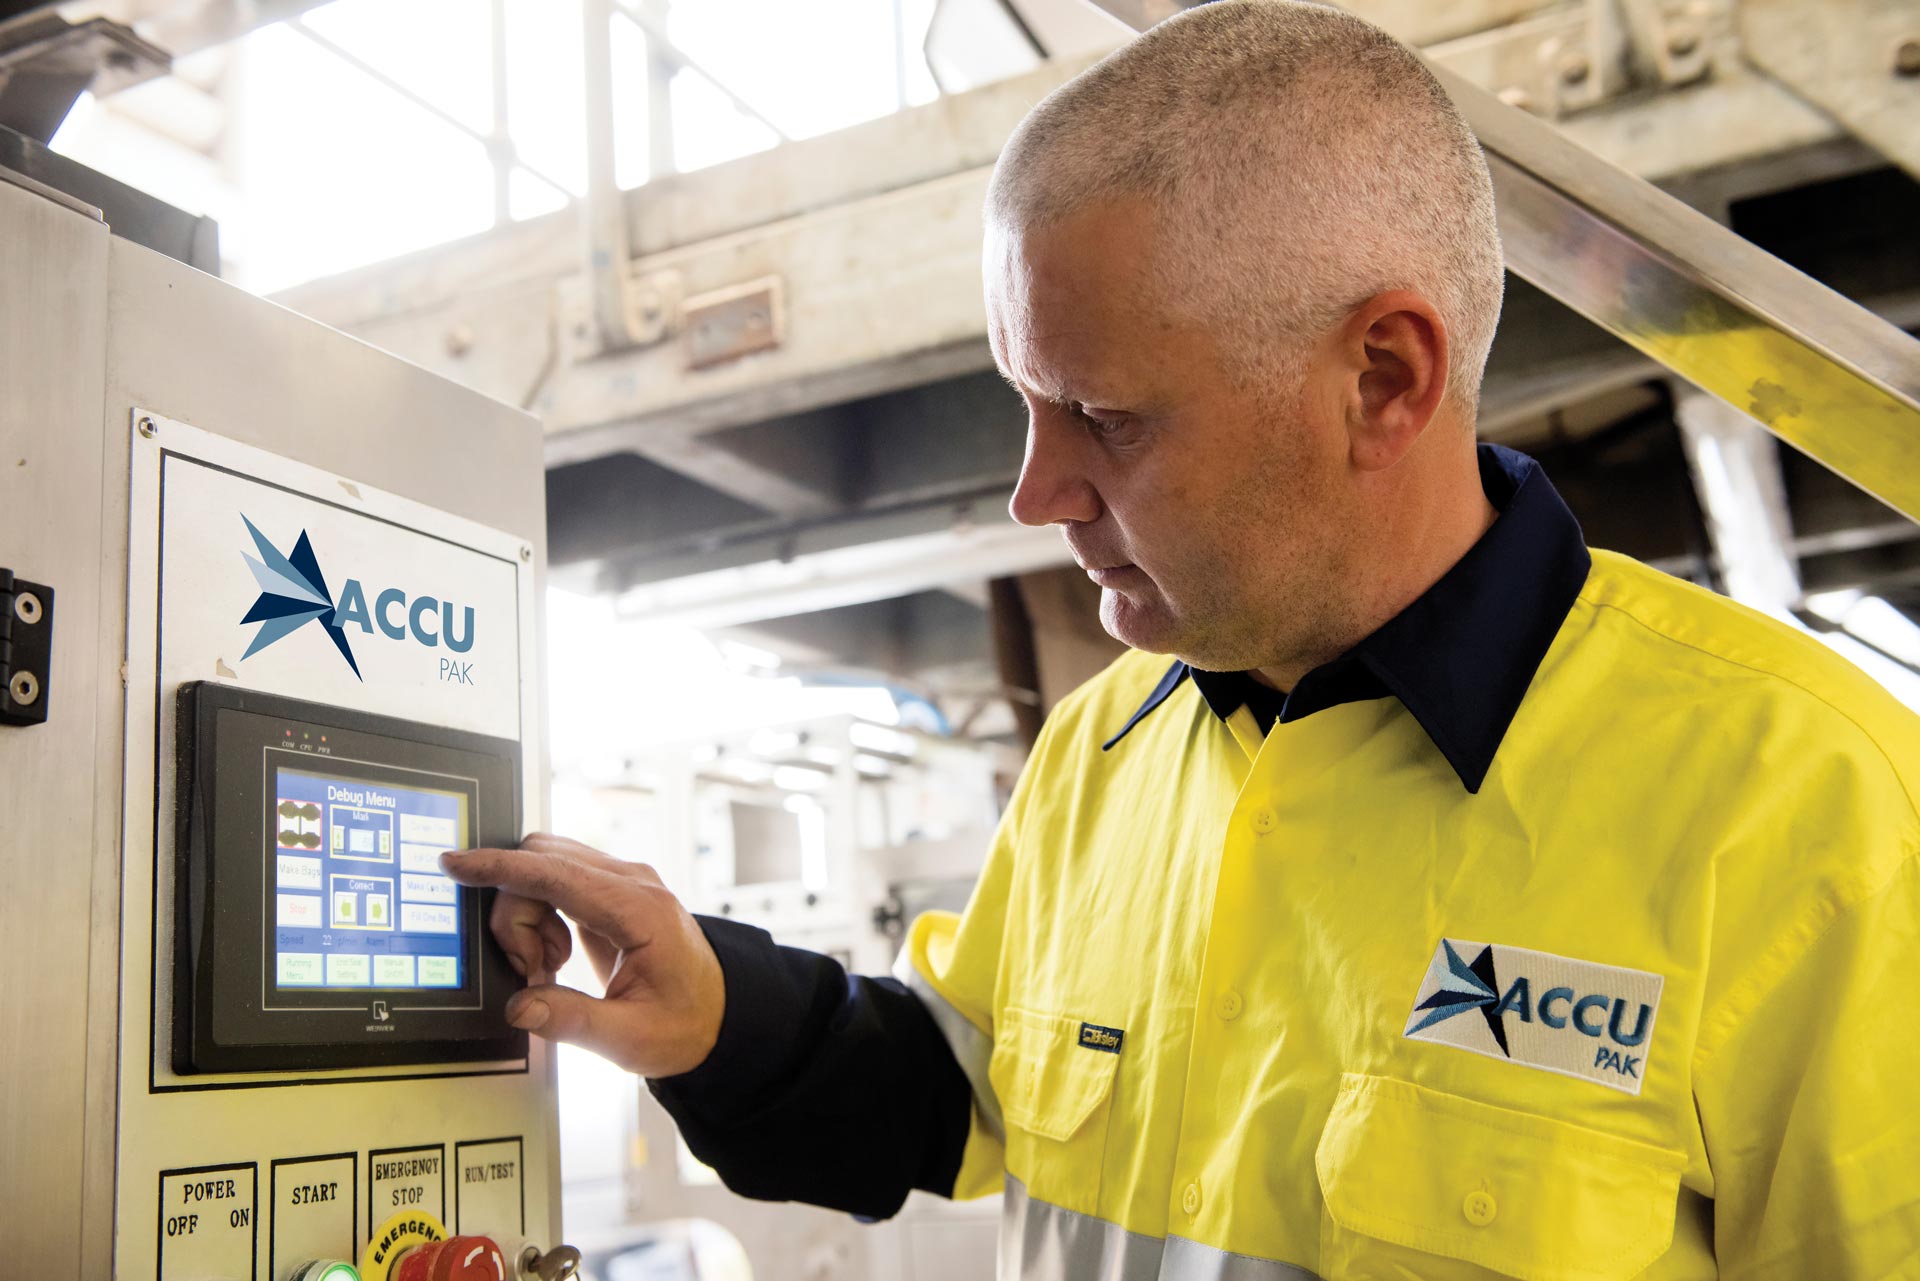 AccuPak technician operating a packaging machine control panel